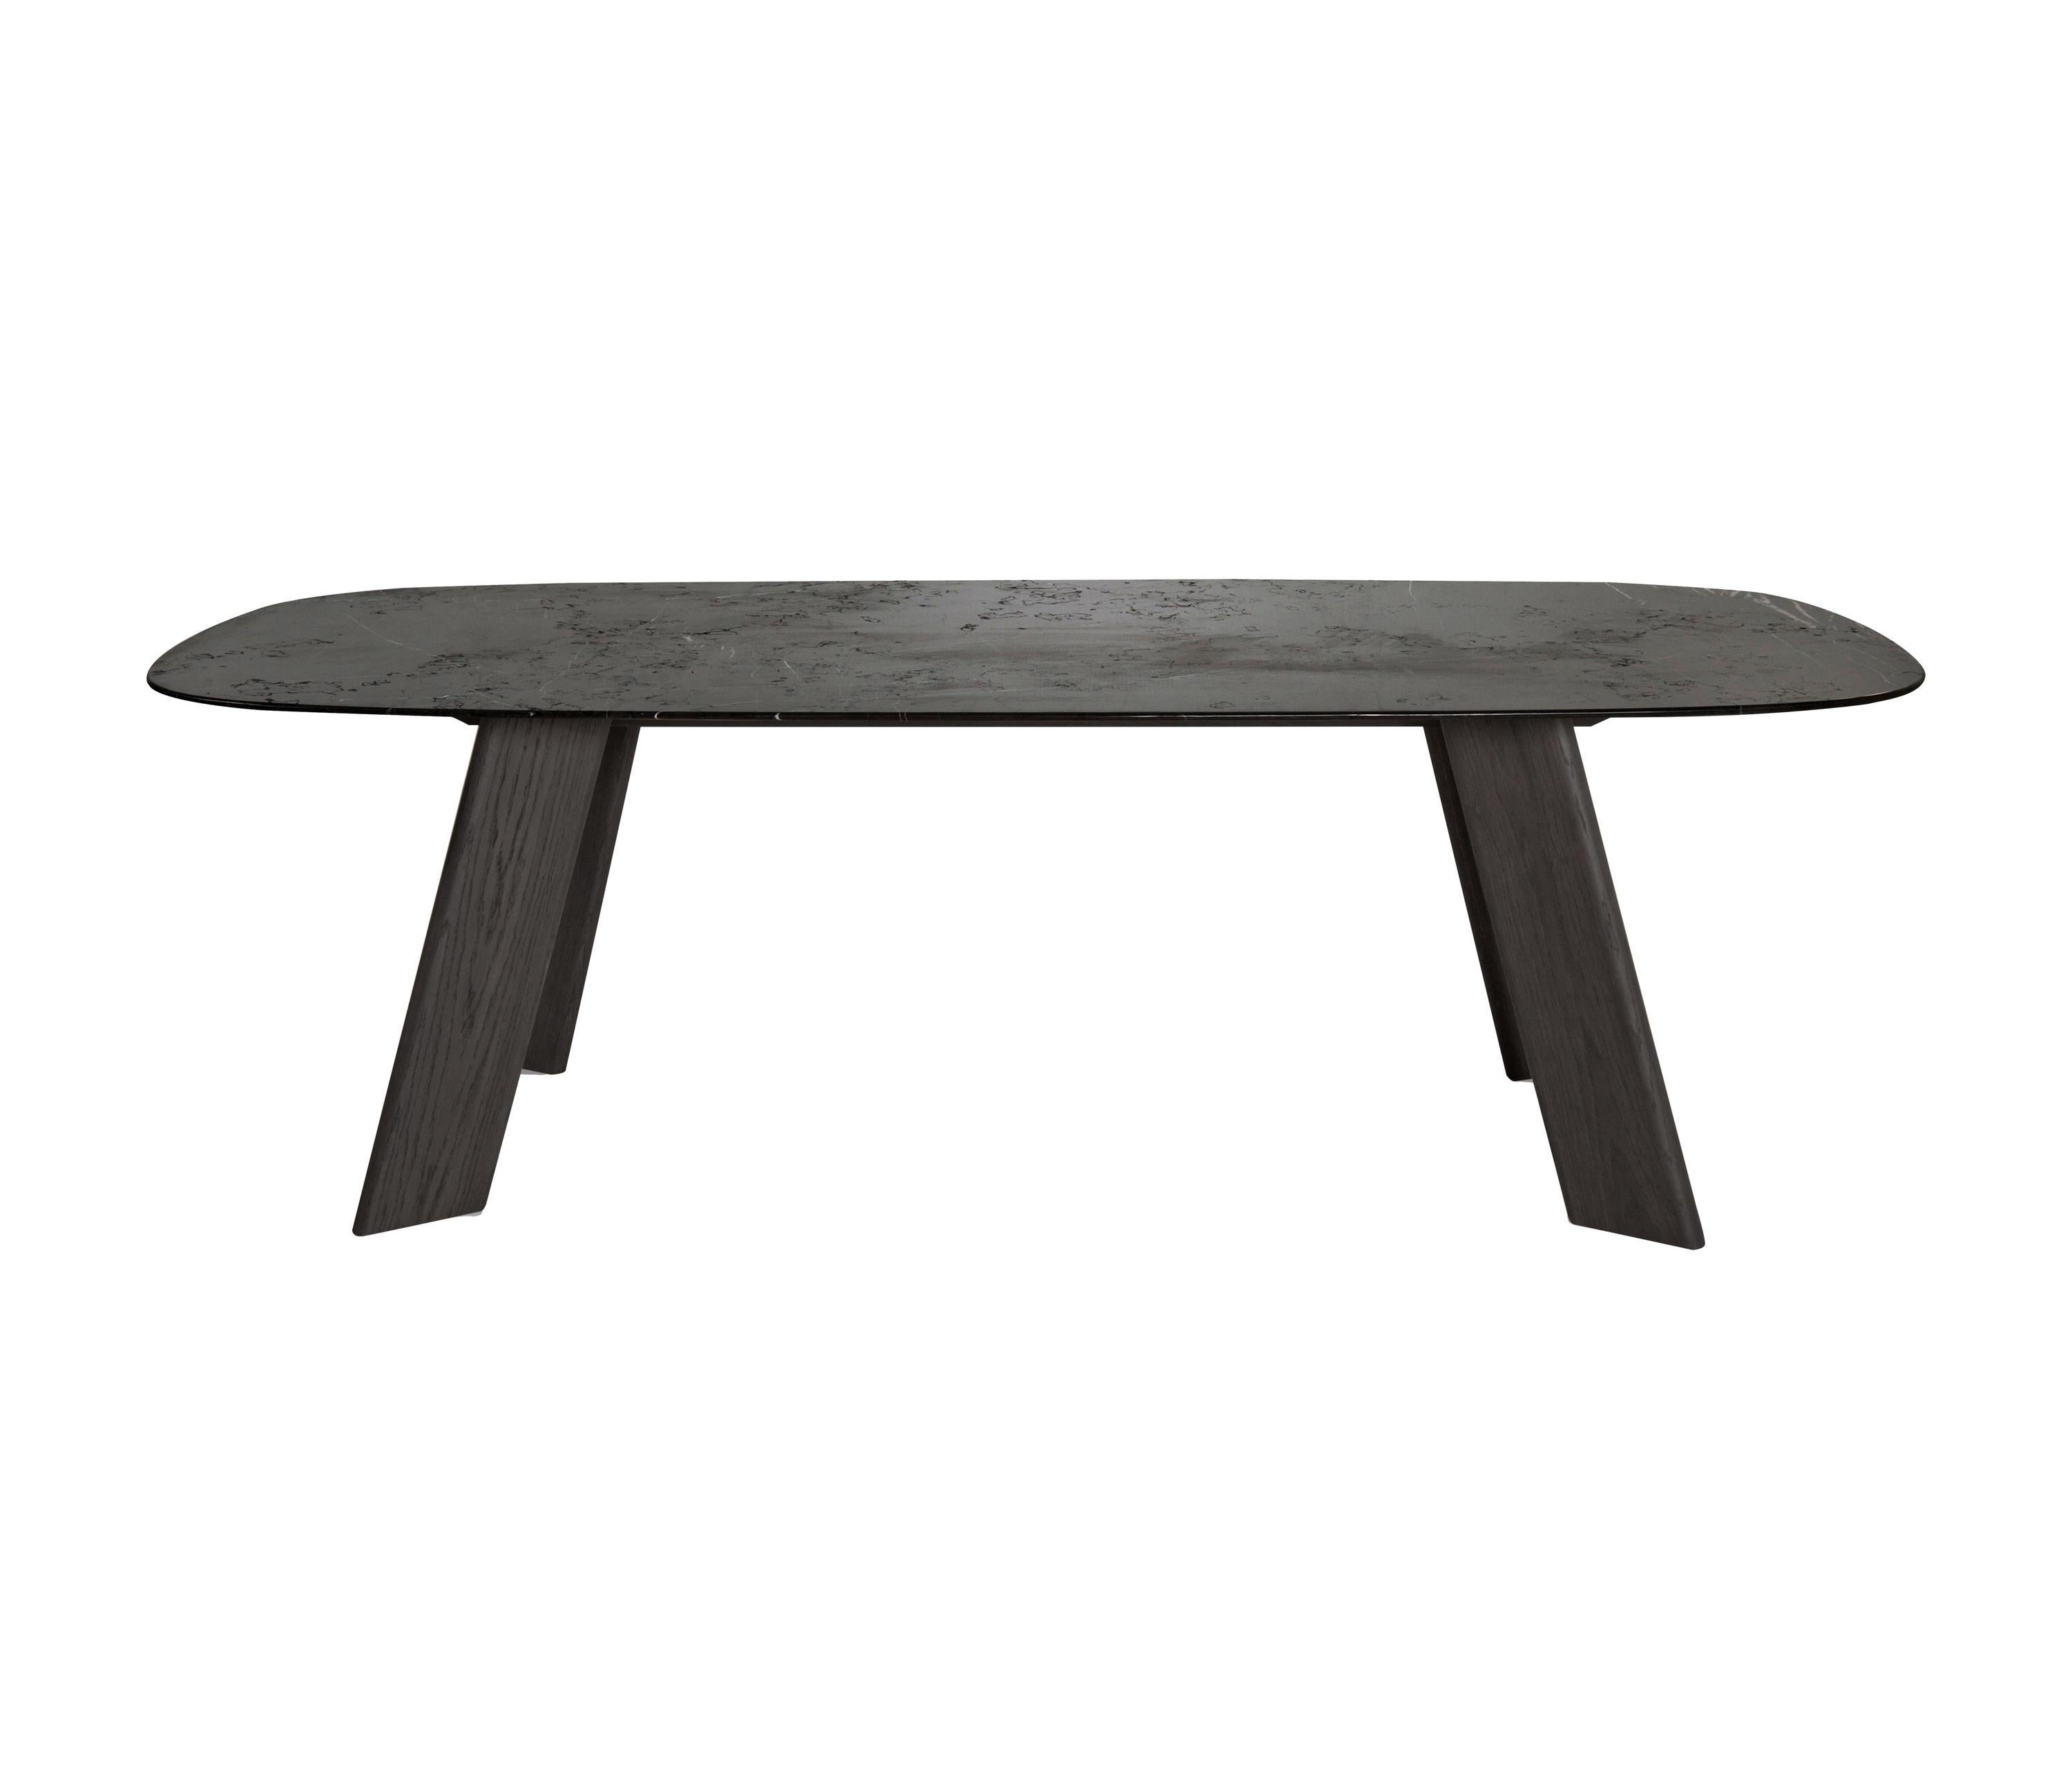 Wood Contemporary Dining Table Ft. Shaped Soap Marble Top For Sale